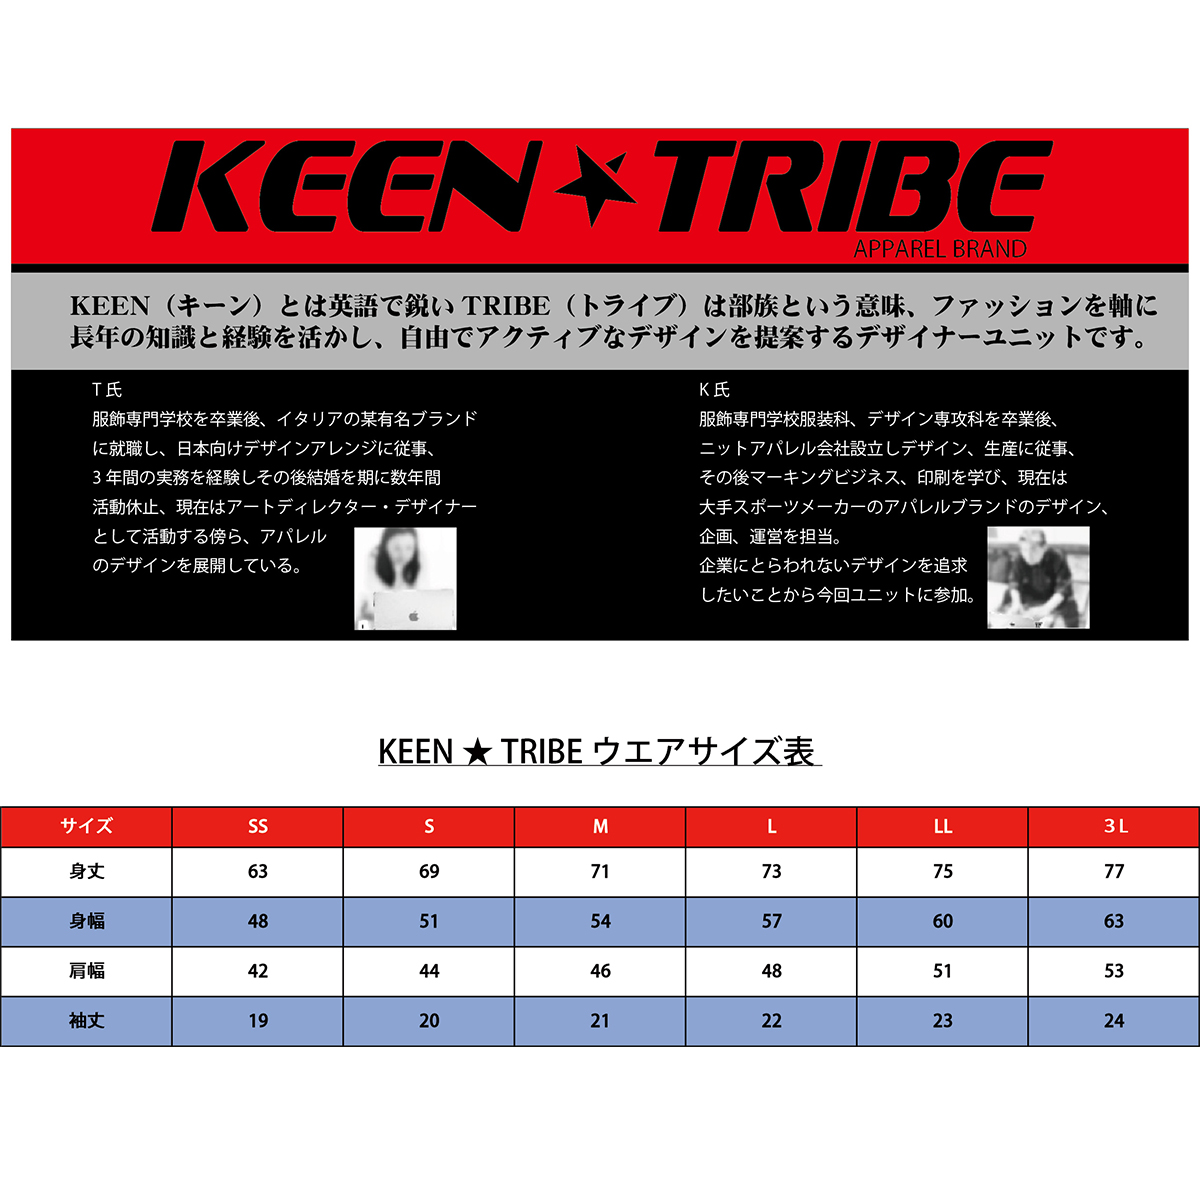 KEEN ★ TRIBE　KT-62(受注生産)